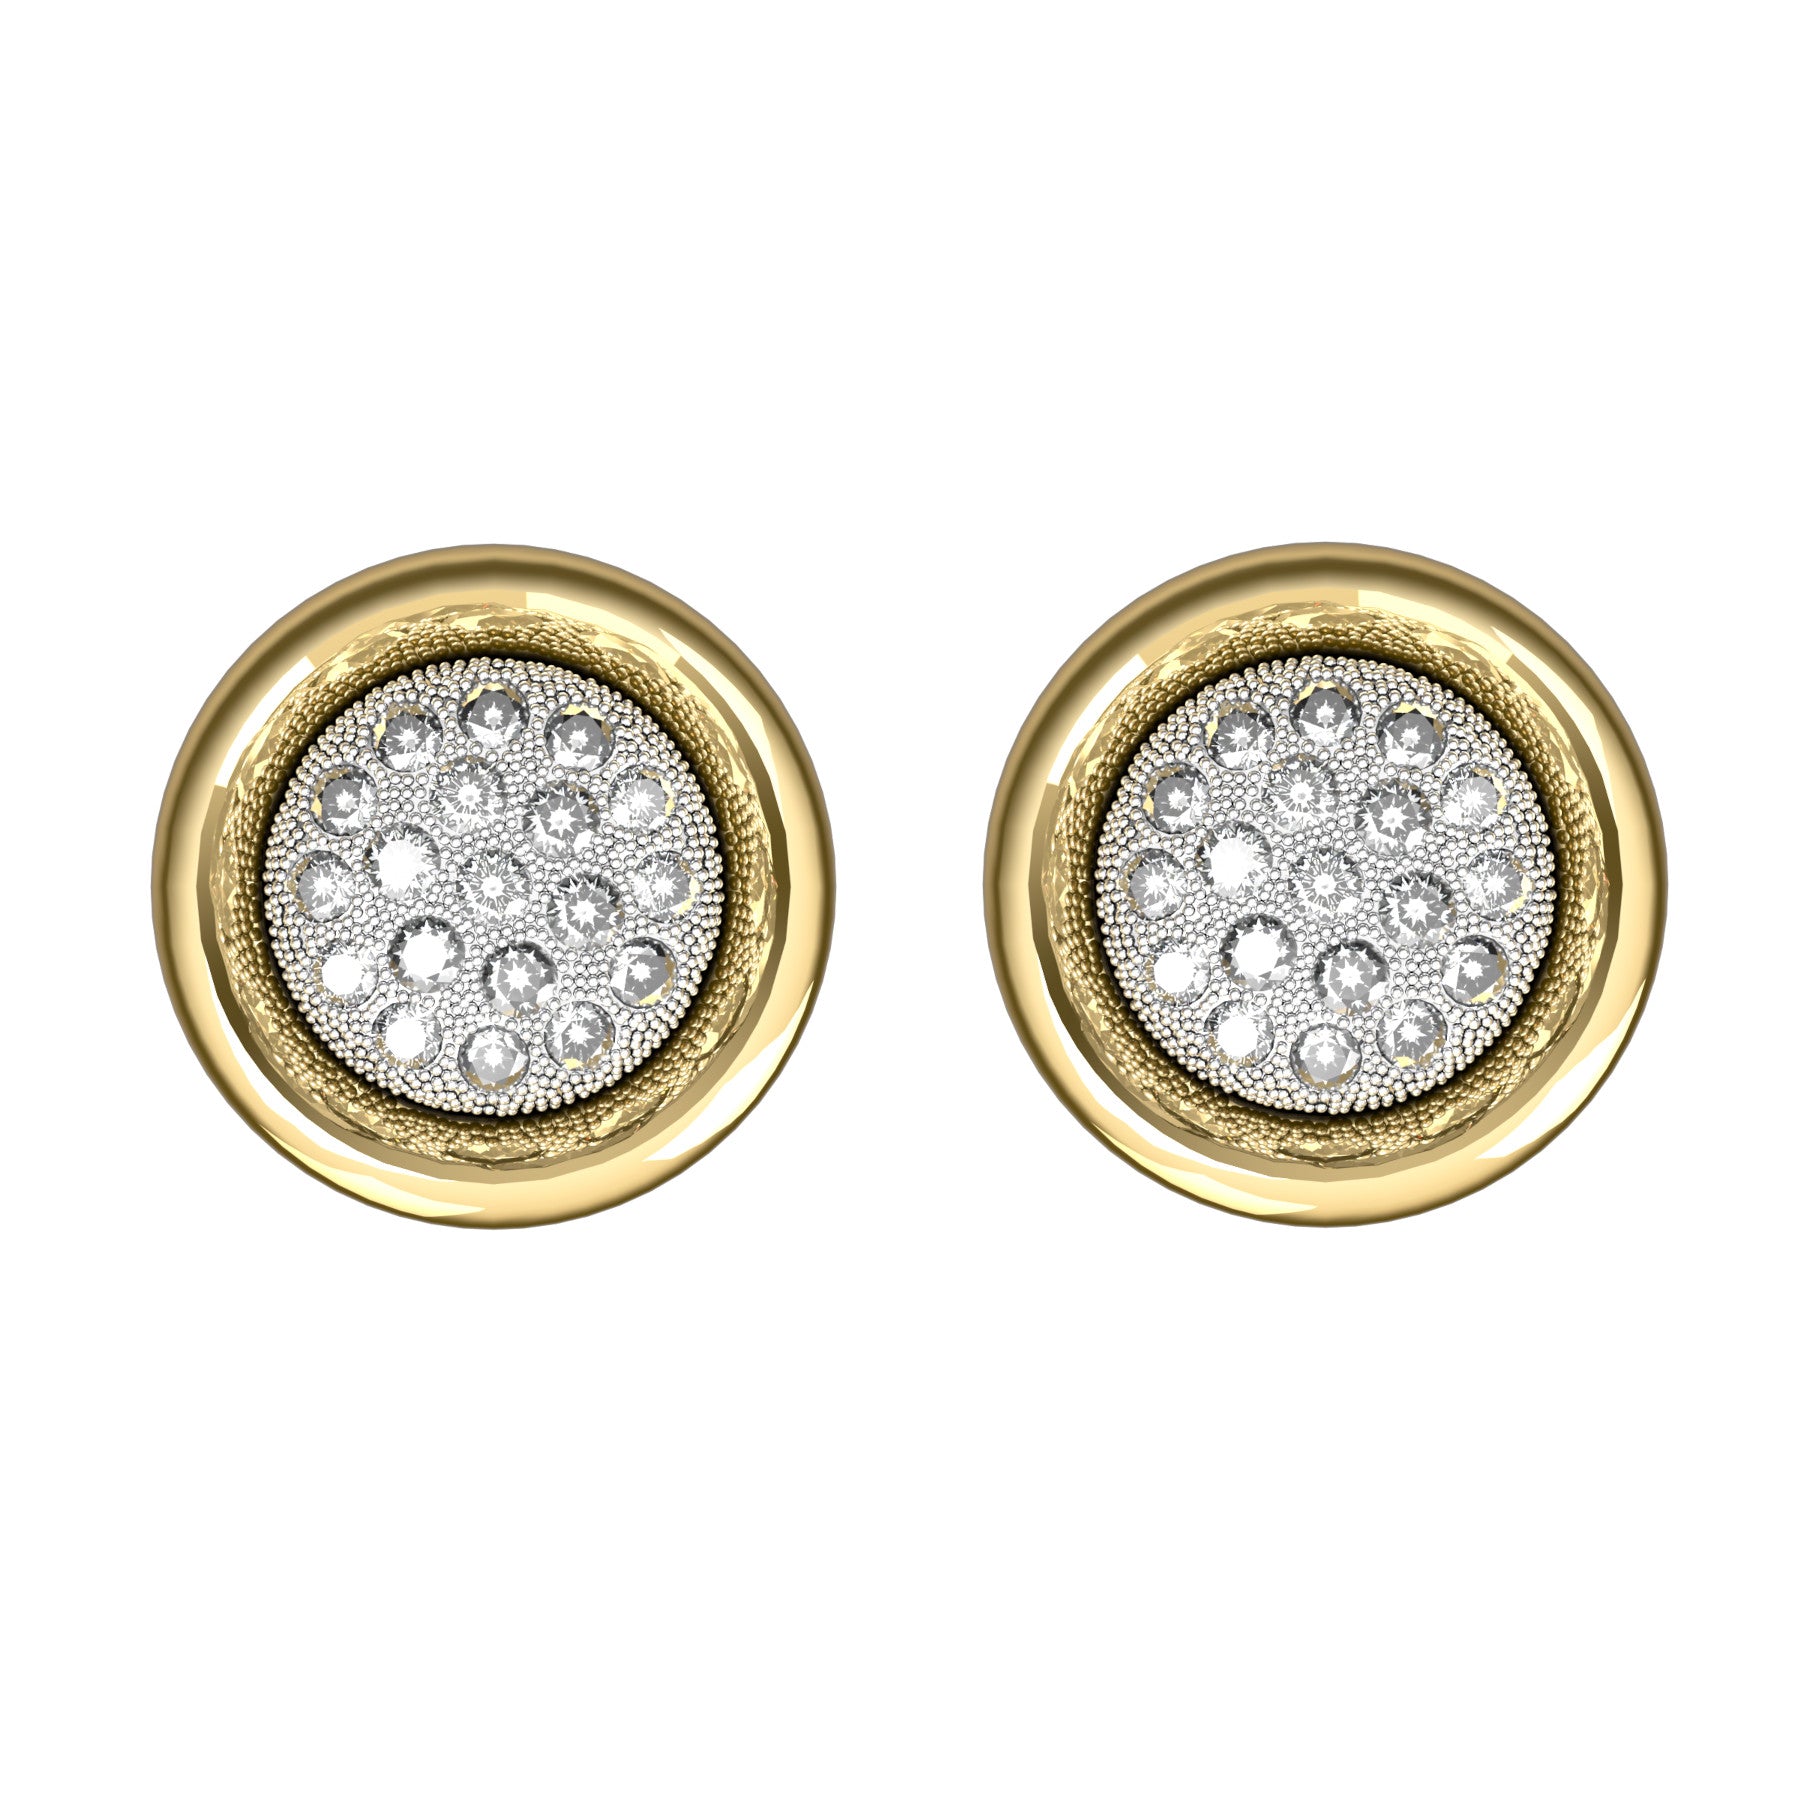 round earrings, round natural diamonds, 18 K yellow and white gold, weight about 10,6 g. (0.38 oz) diameter 15 mm